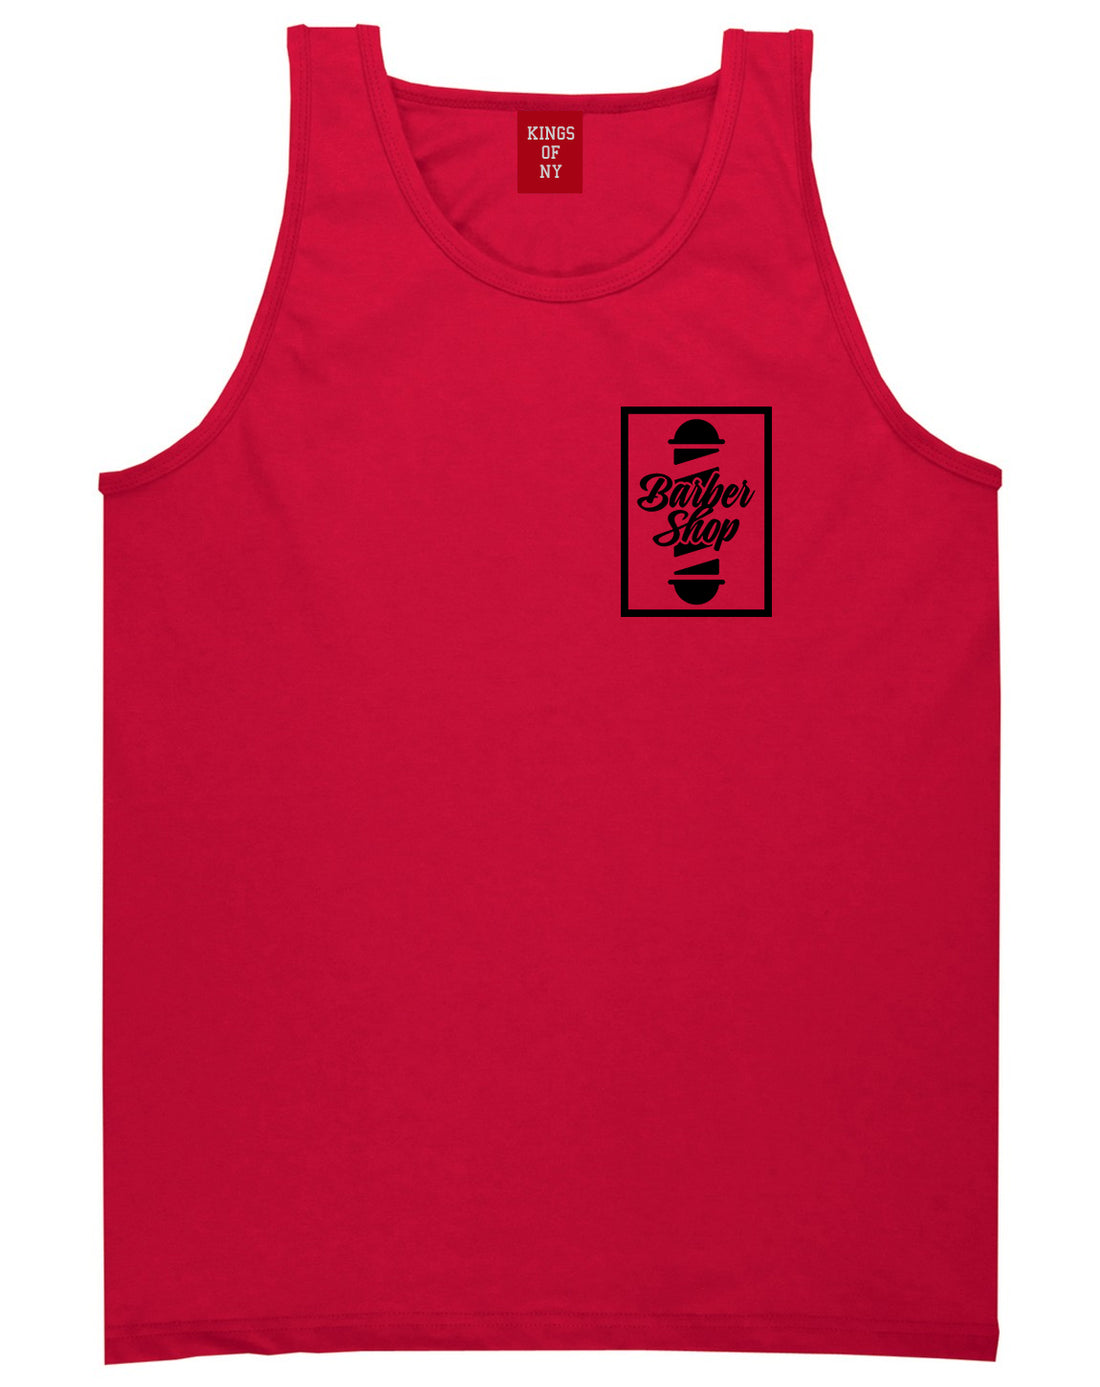 Barbershop Pole Chest Red Tank Top Shirt by Kings Of NY